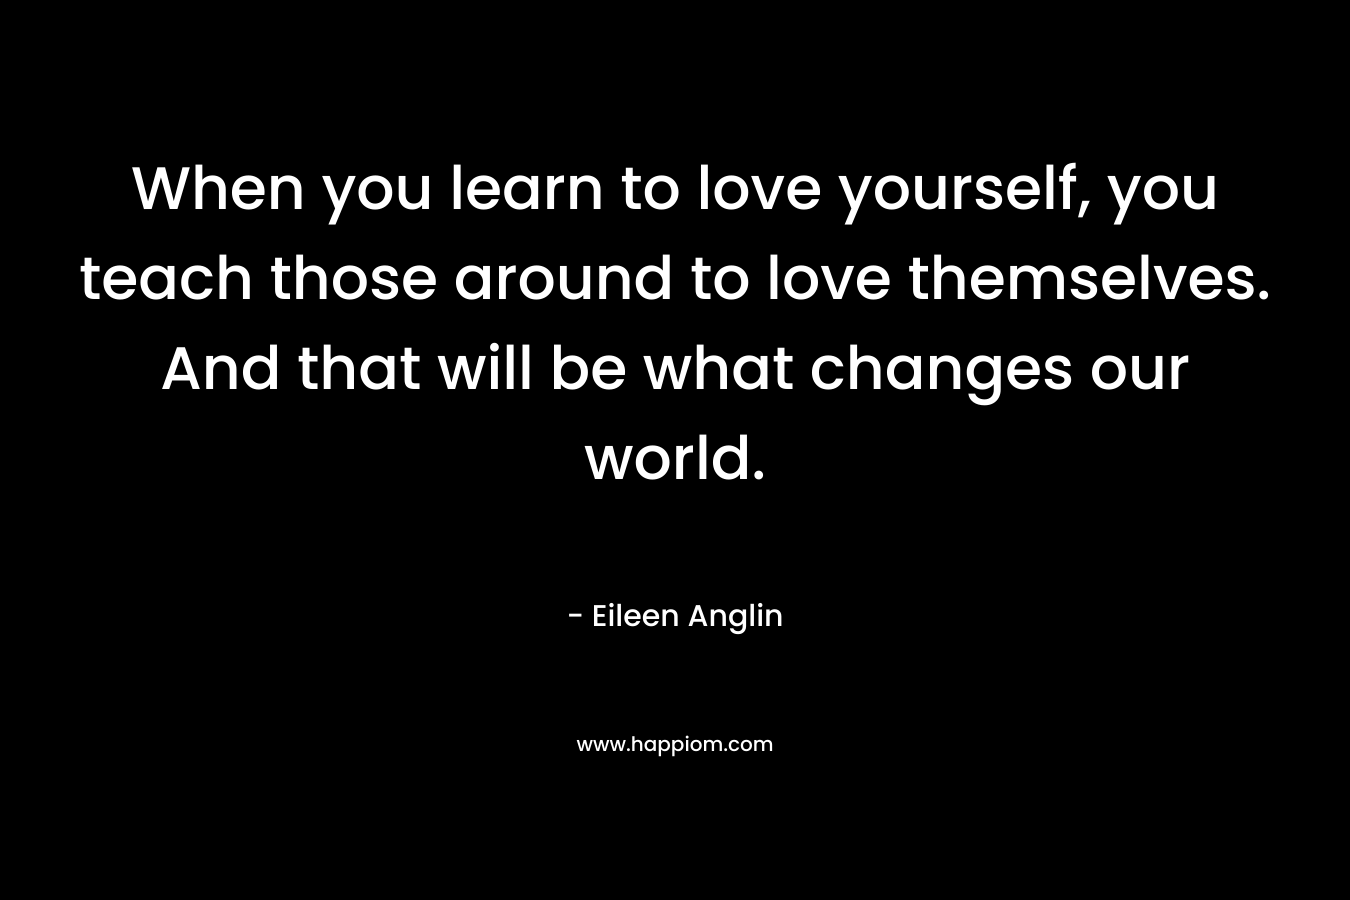 When you learn to love yourself, you teach those around to love themselves. And that will be what changes our world.